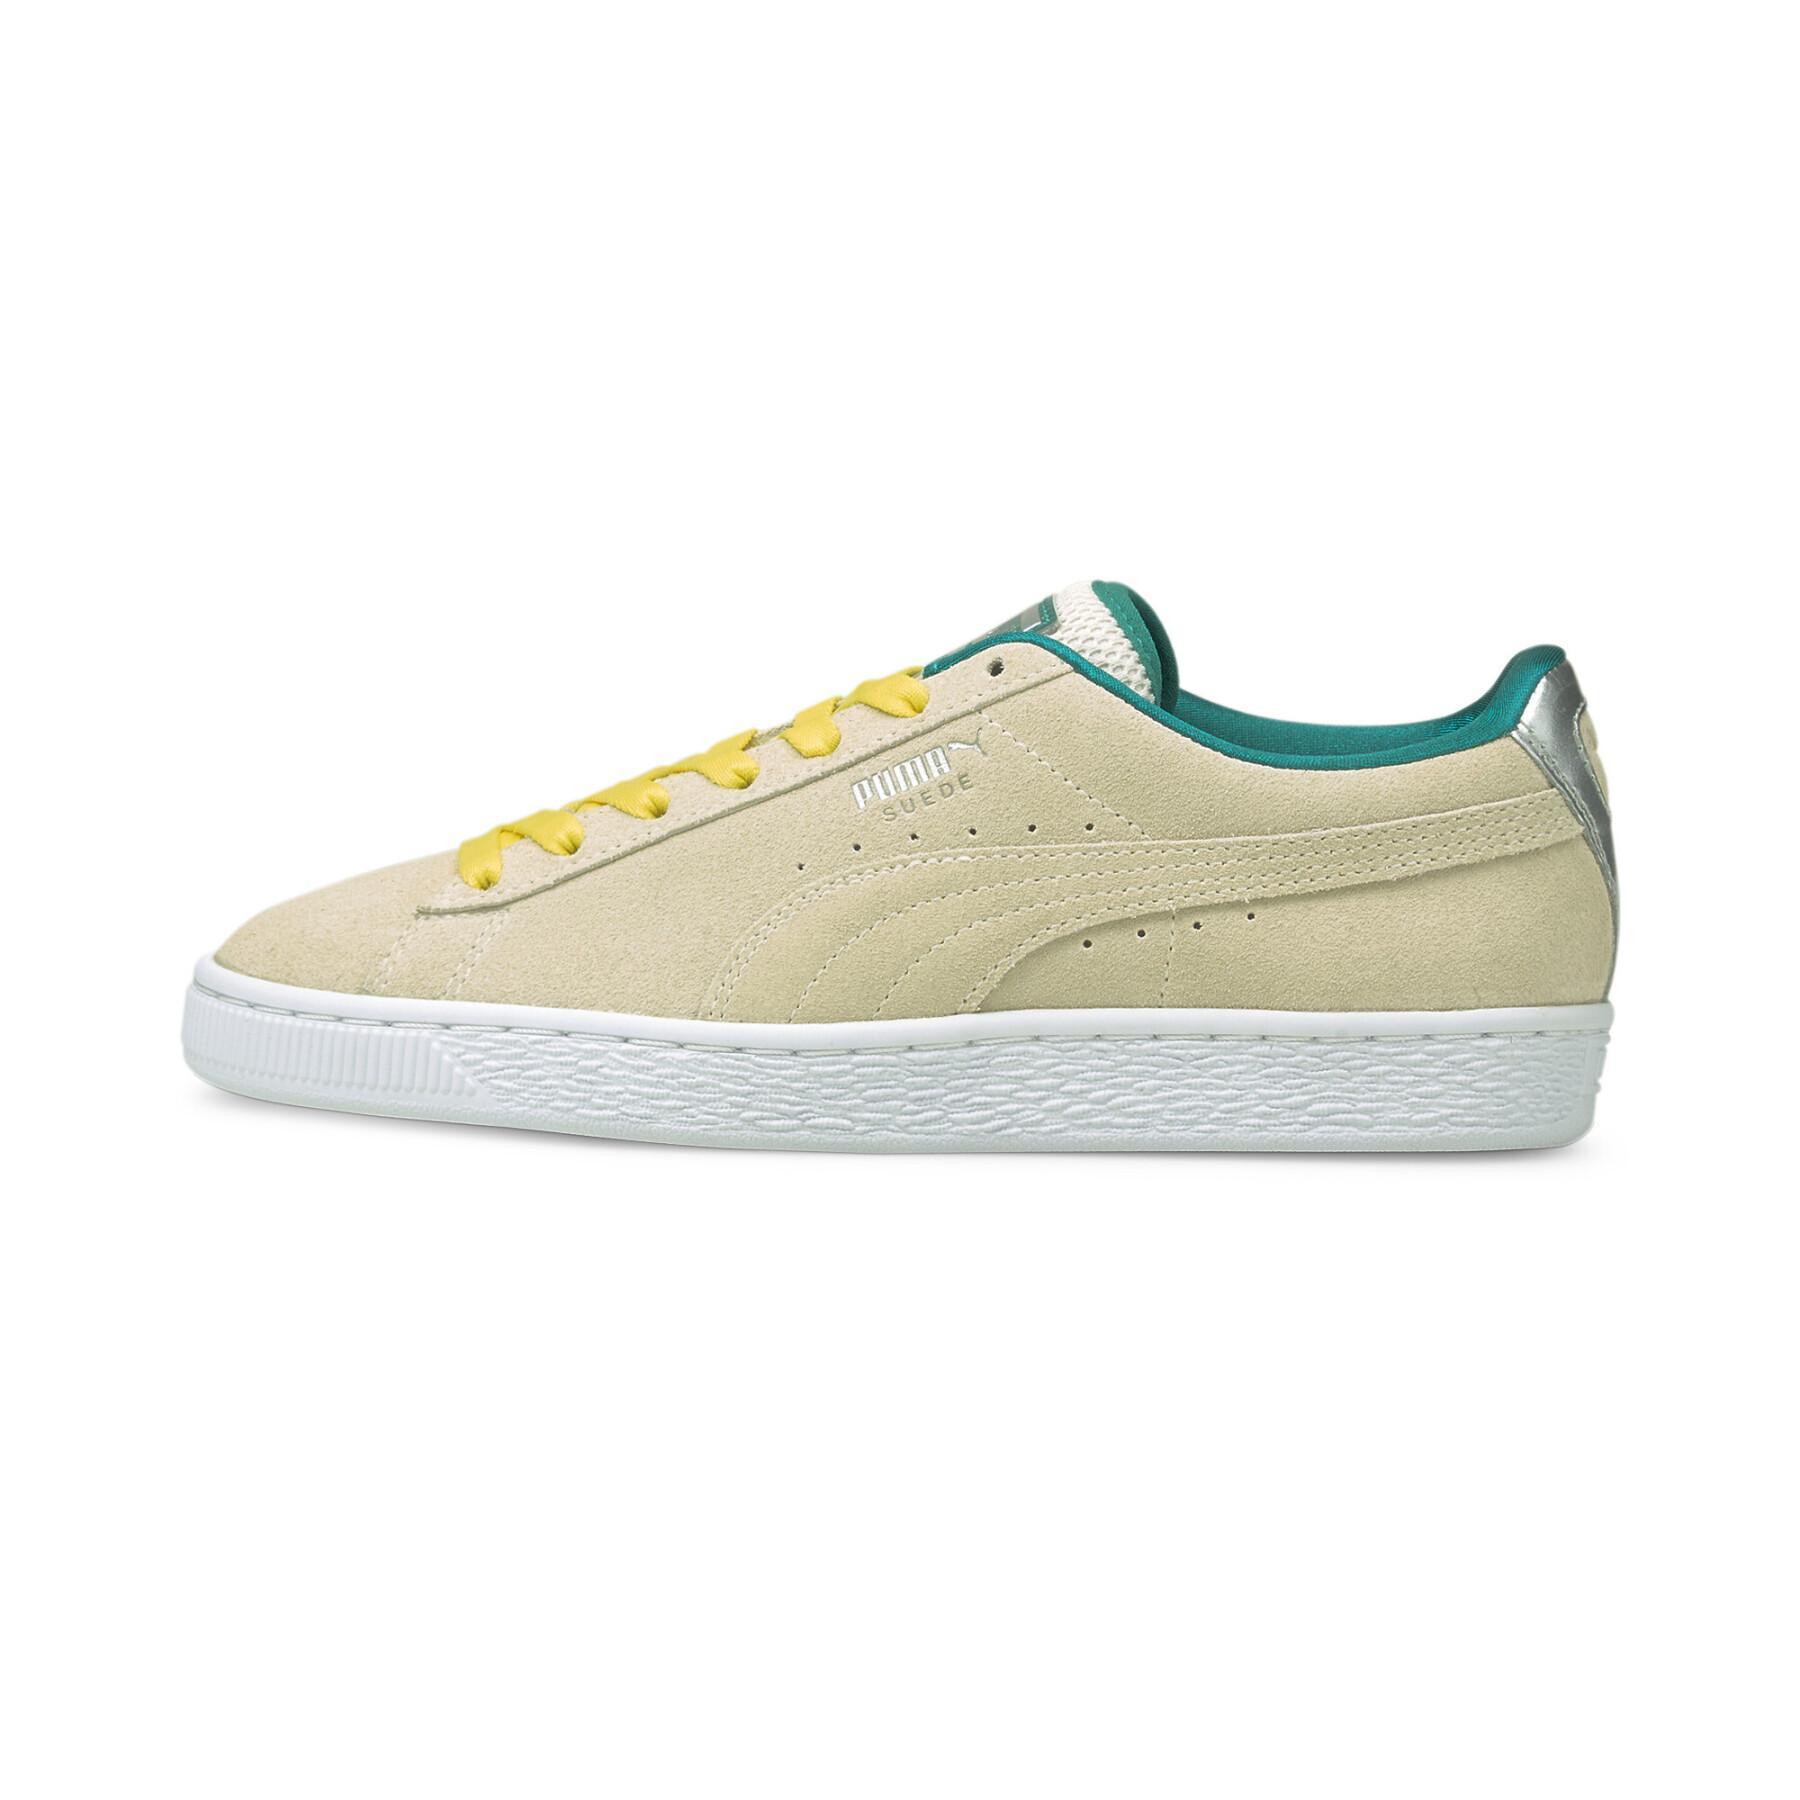 houding infrastructuur Immoraliteit Women's shoes Puma Suede Classic OQ - Puma - Sneakers - Lifestyle